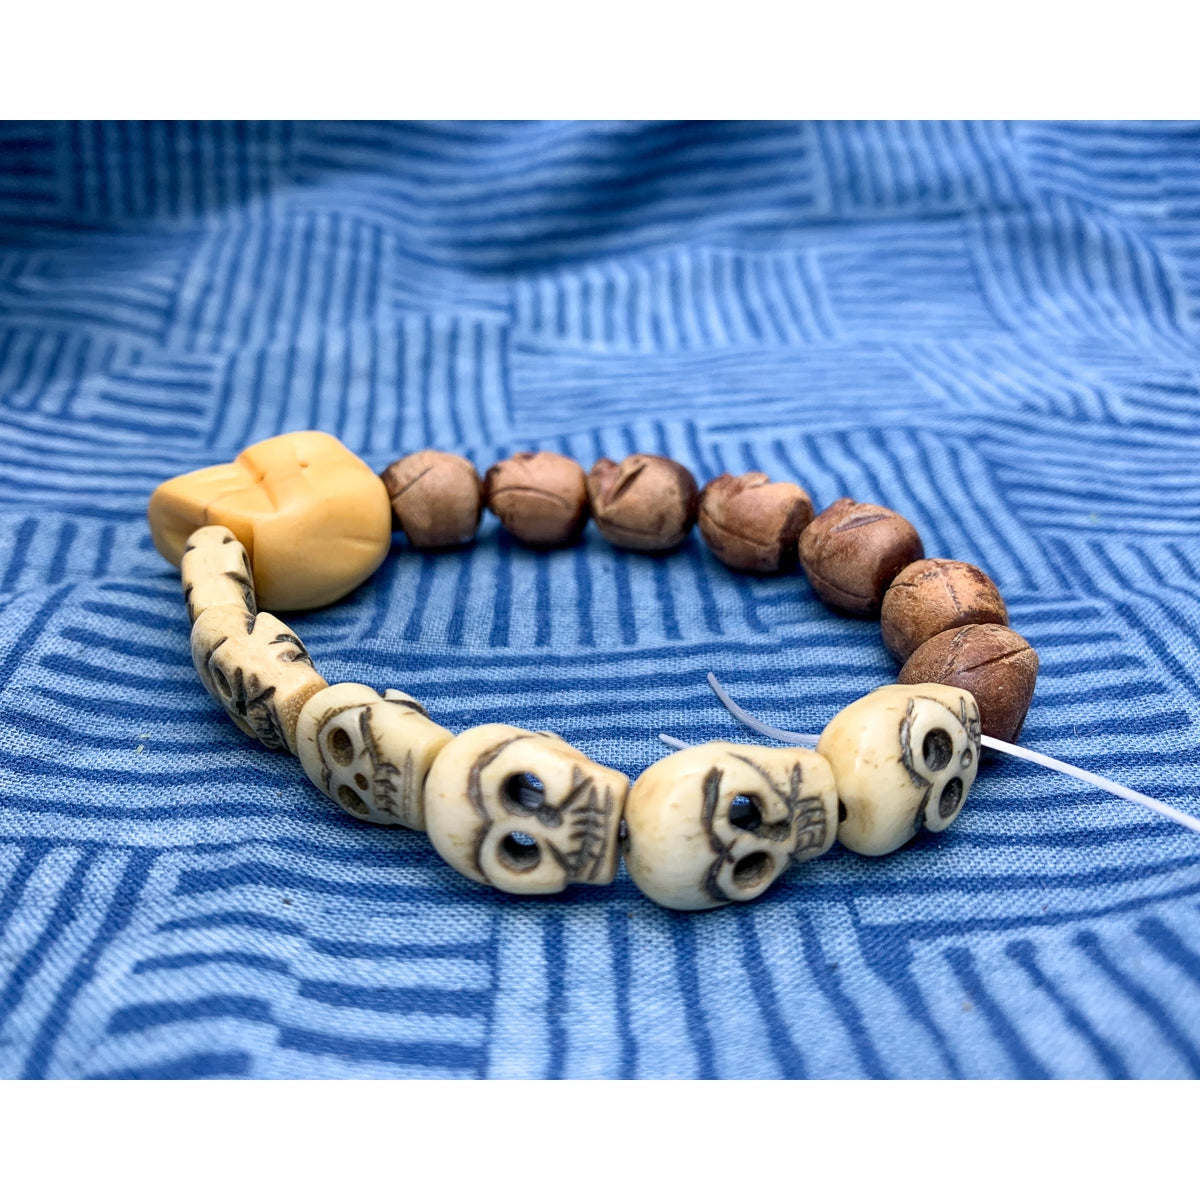 Skull Bracelet 6mm Wood Beads Choice of Ivory, Pink or Dark Brown Wood Beads  Stretchy - Etsy